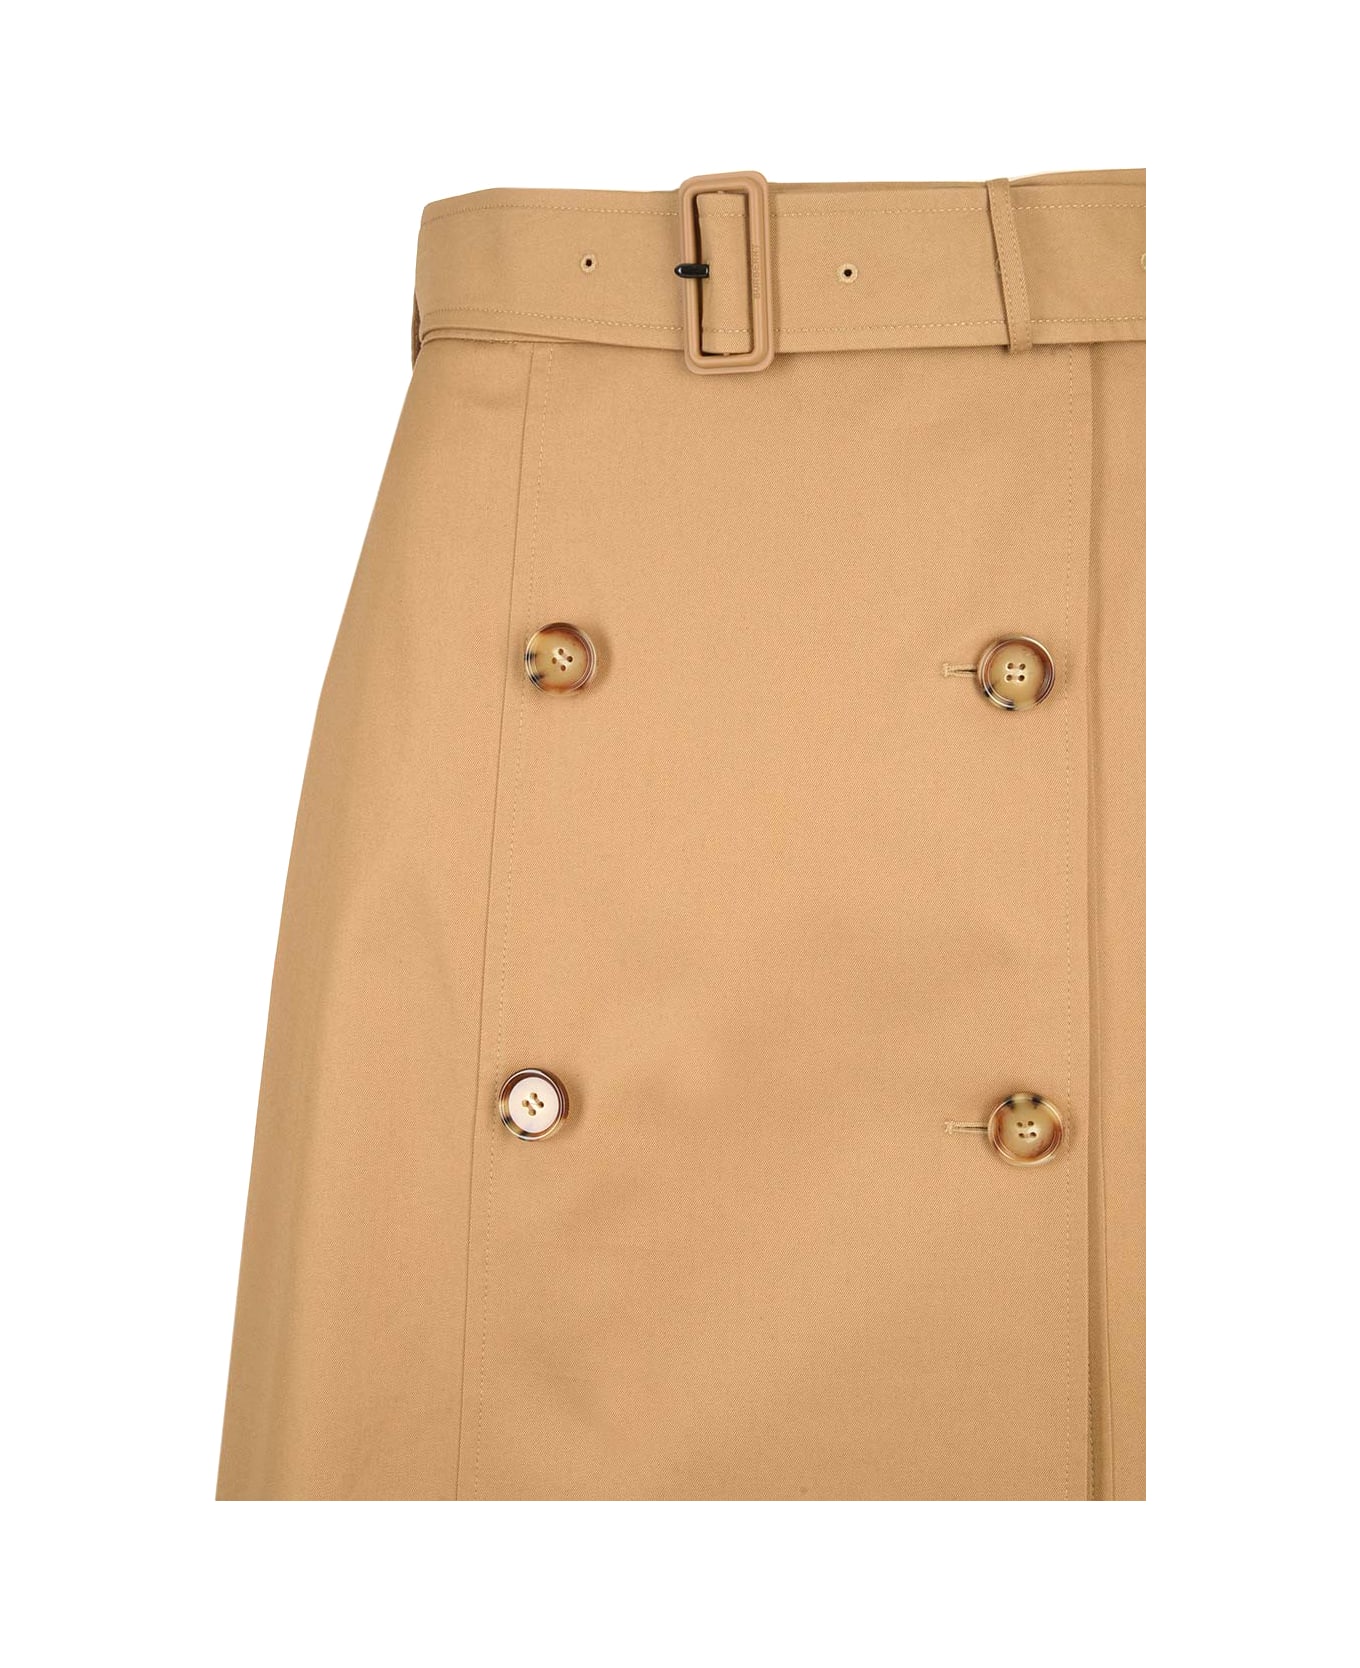 Burberry 'baleigh' Trench-style Skirt - Beige スカート